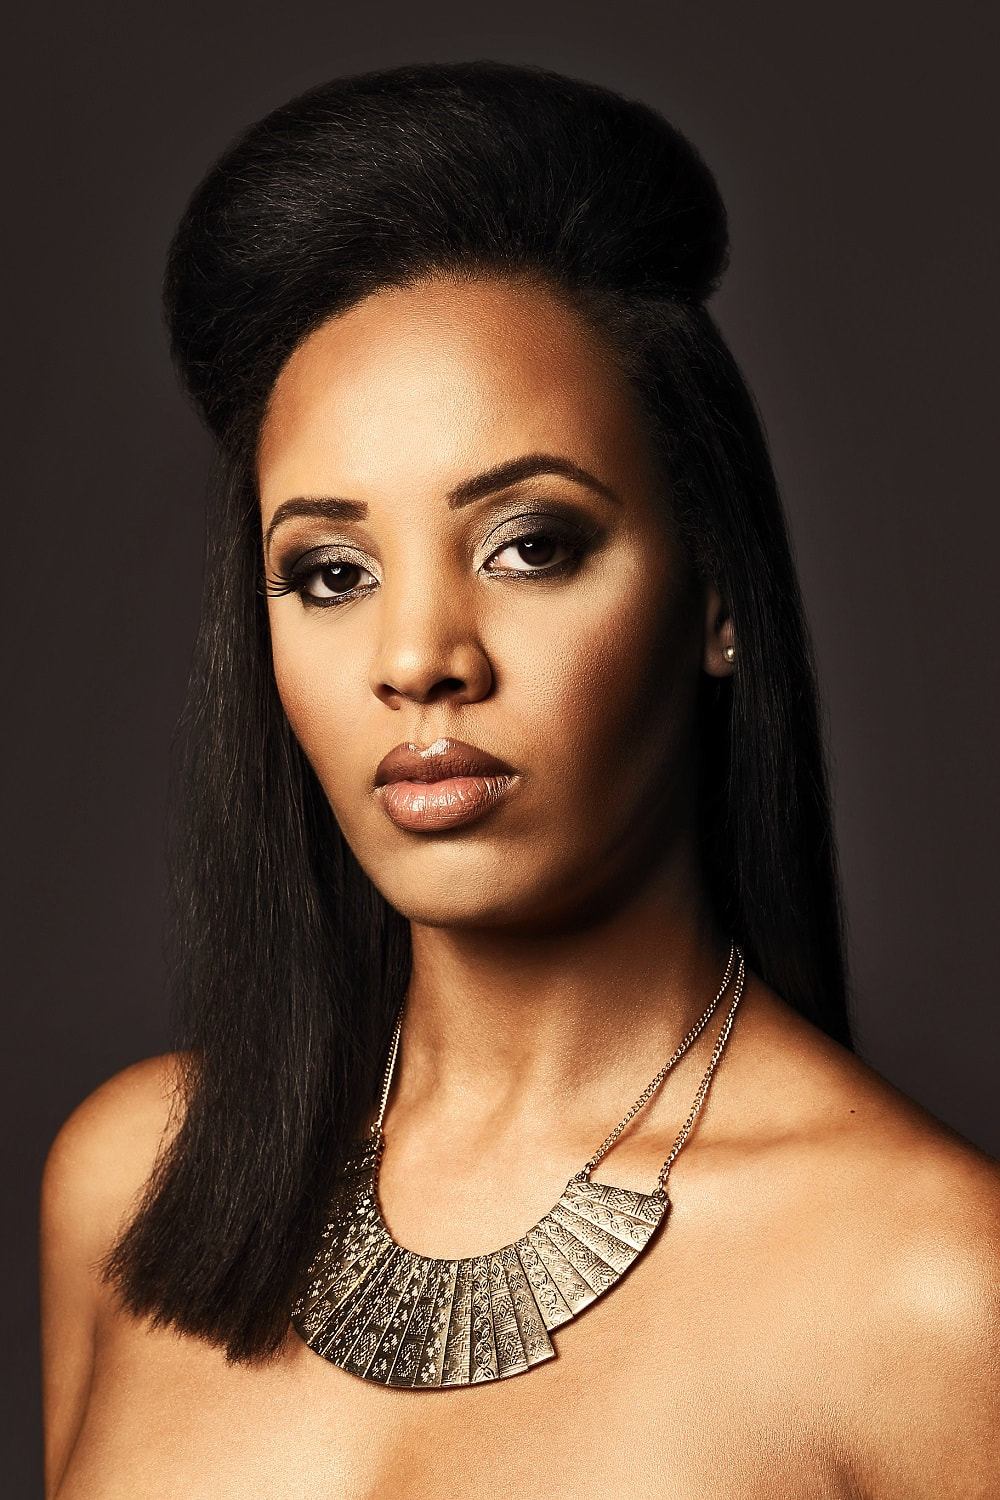 Black female model that is modelling her hair. She has shoulder lenthg hair that is straight and the sides and back are falling down whilst the front is styled up in a big quif.